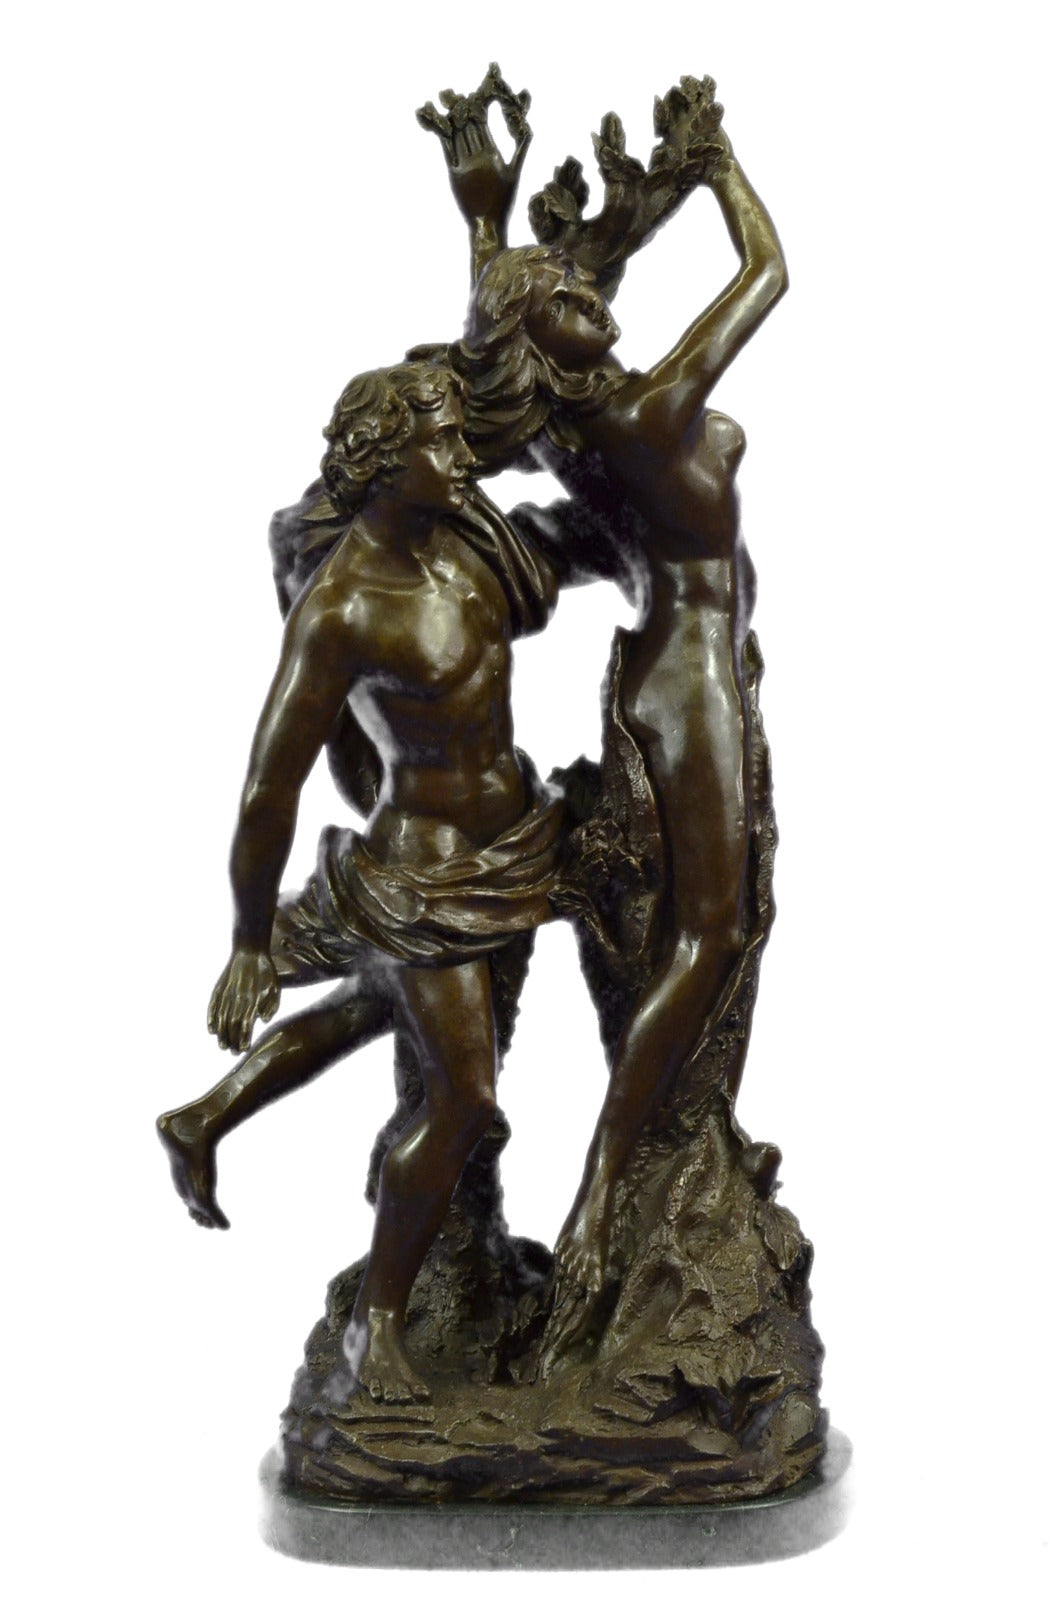 Extra Large 75 LBS Apollo and Daphne Mythical Greek Mythology Bronze Sculpture